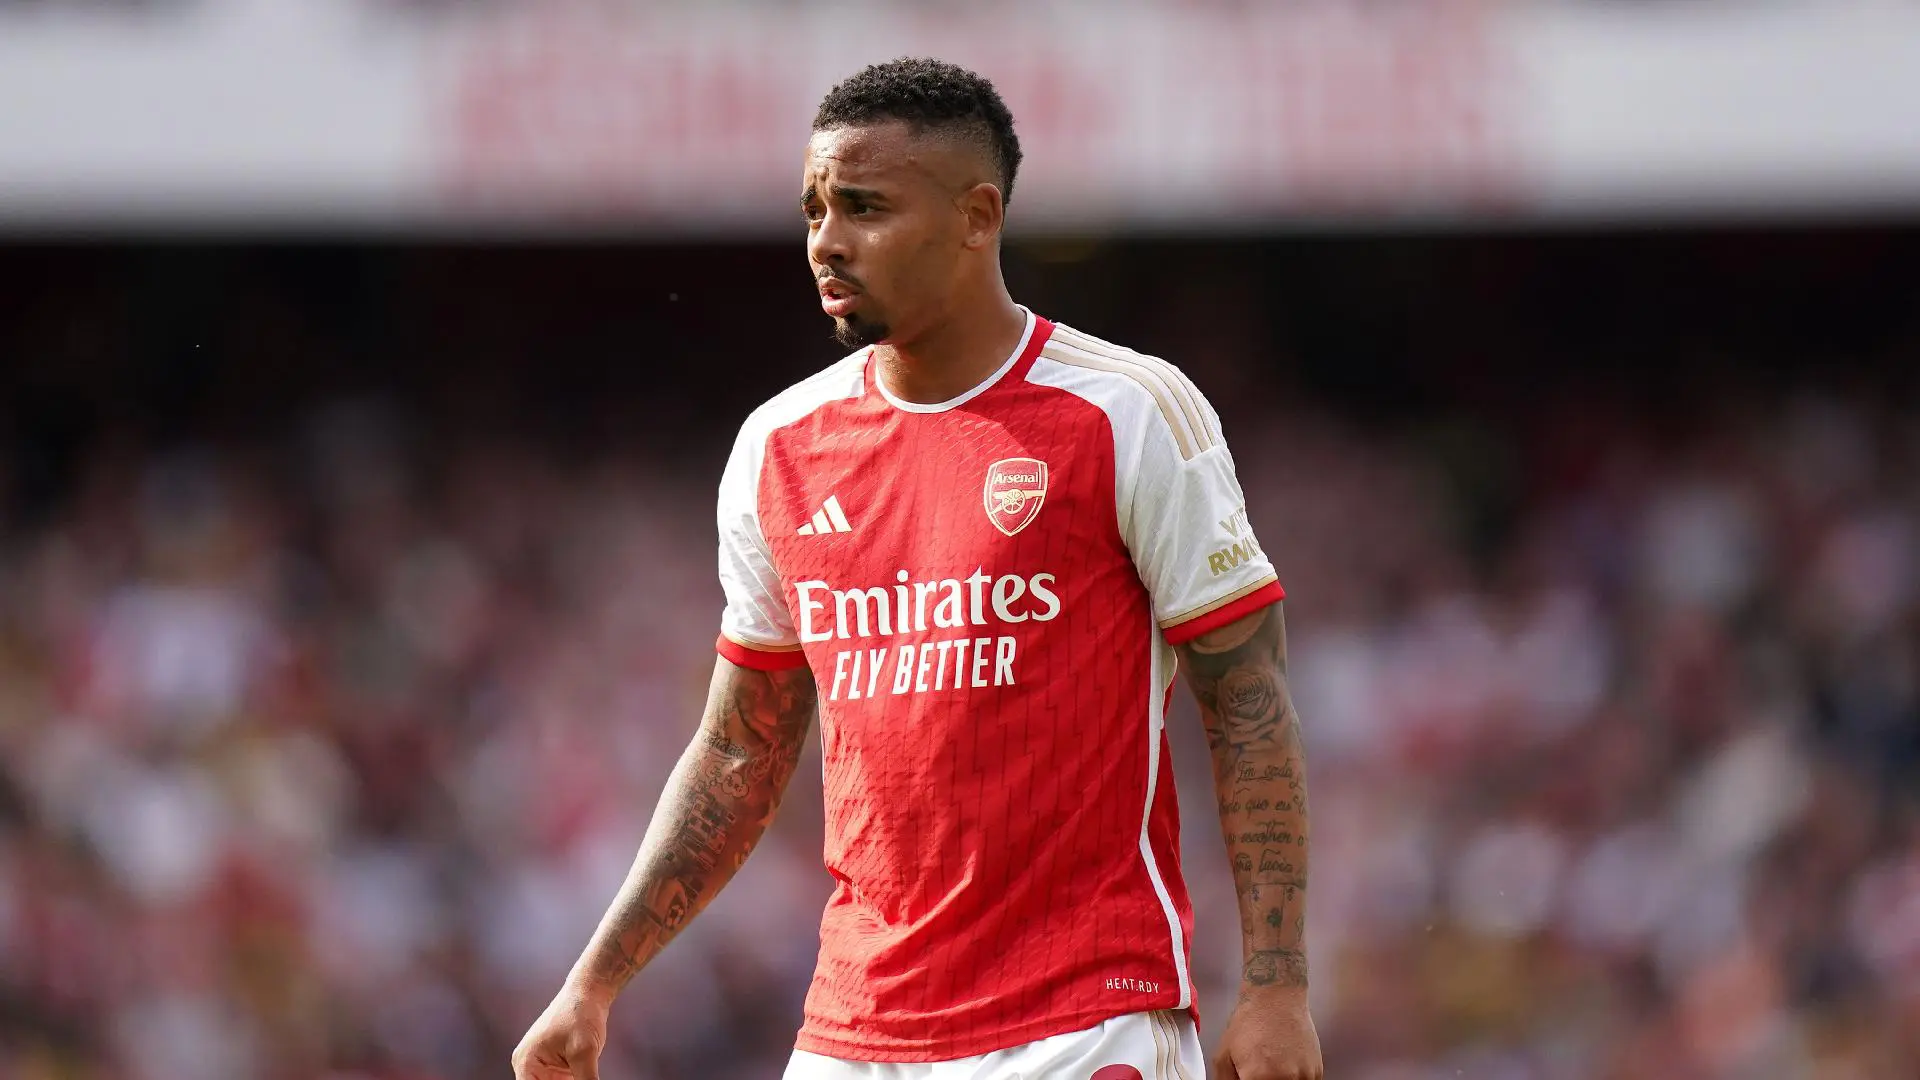 EPL: He’s very special – Jesus hails Arsenal star